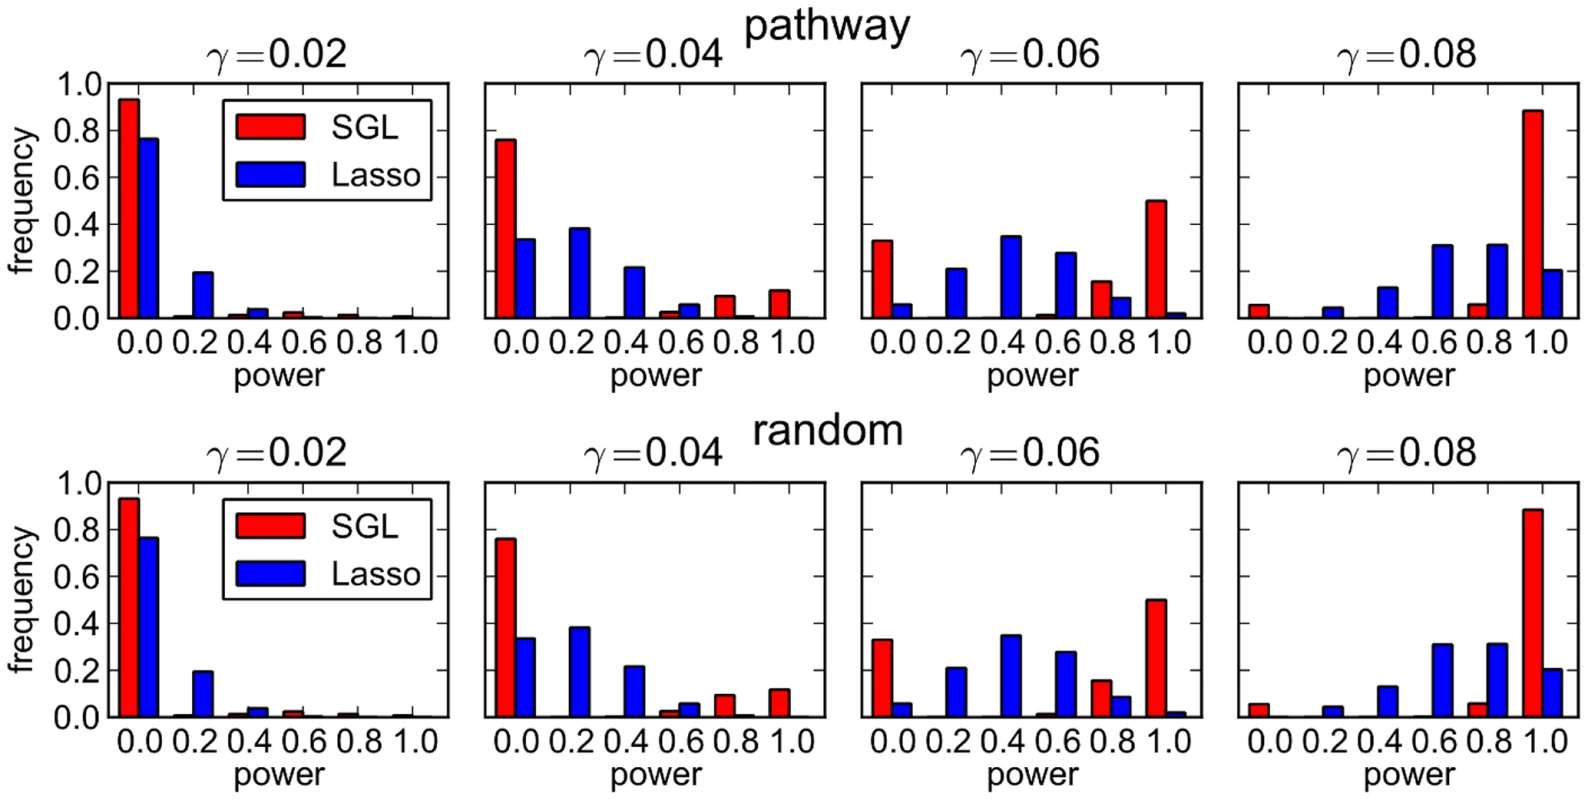 SGL vs Lasso: distribution over 500 MC simulations of power to detect 5 causal SNPs.